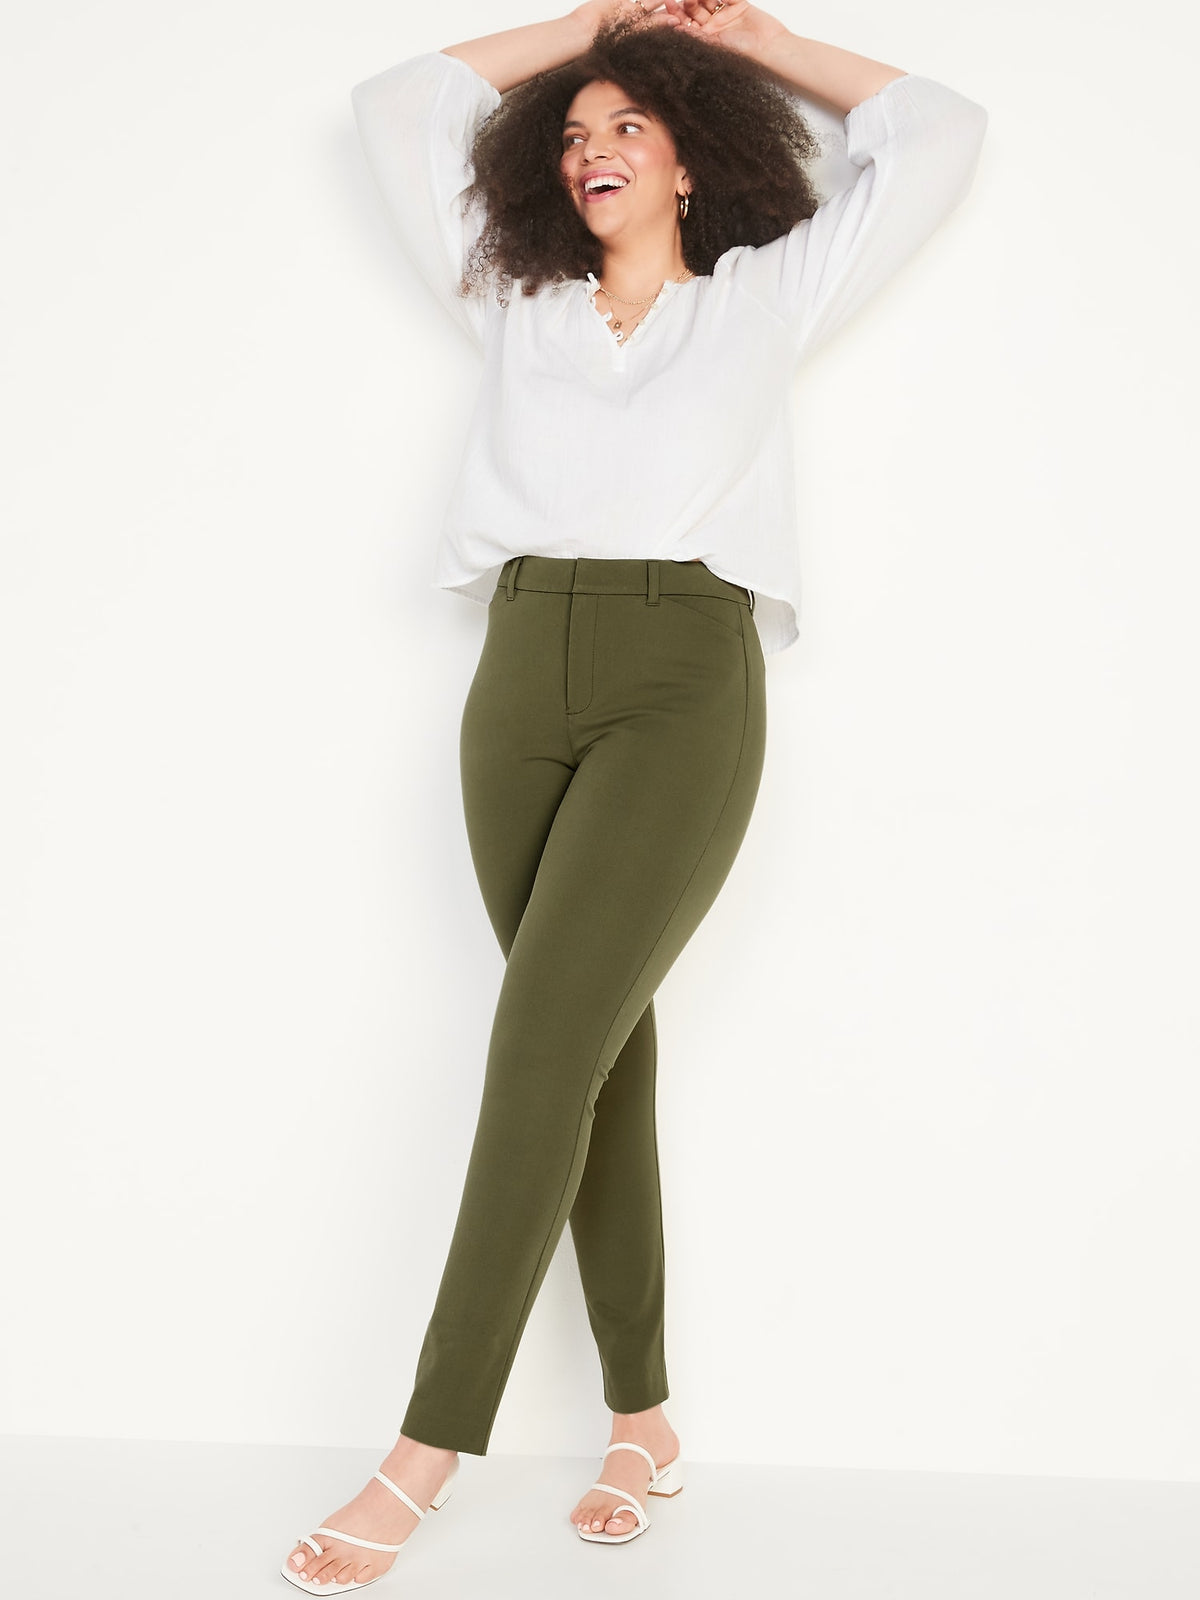 High-Waisted Never-Fade Pixie Ankle Pants for Women - Old Navy Philippines